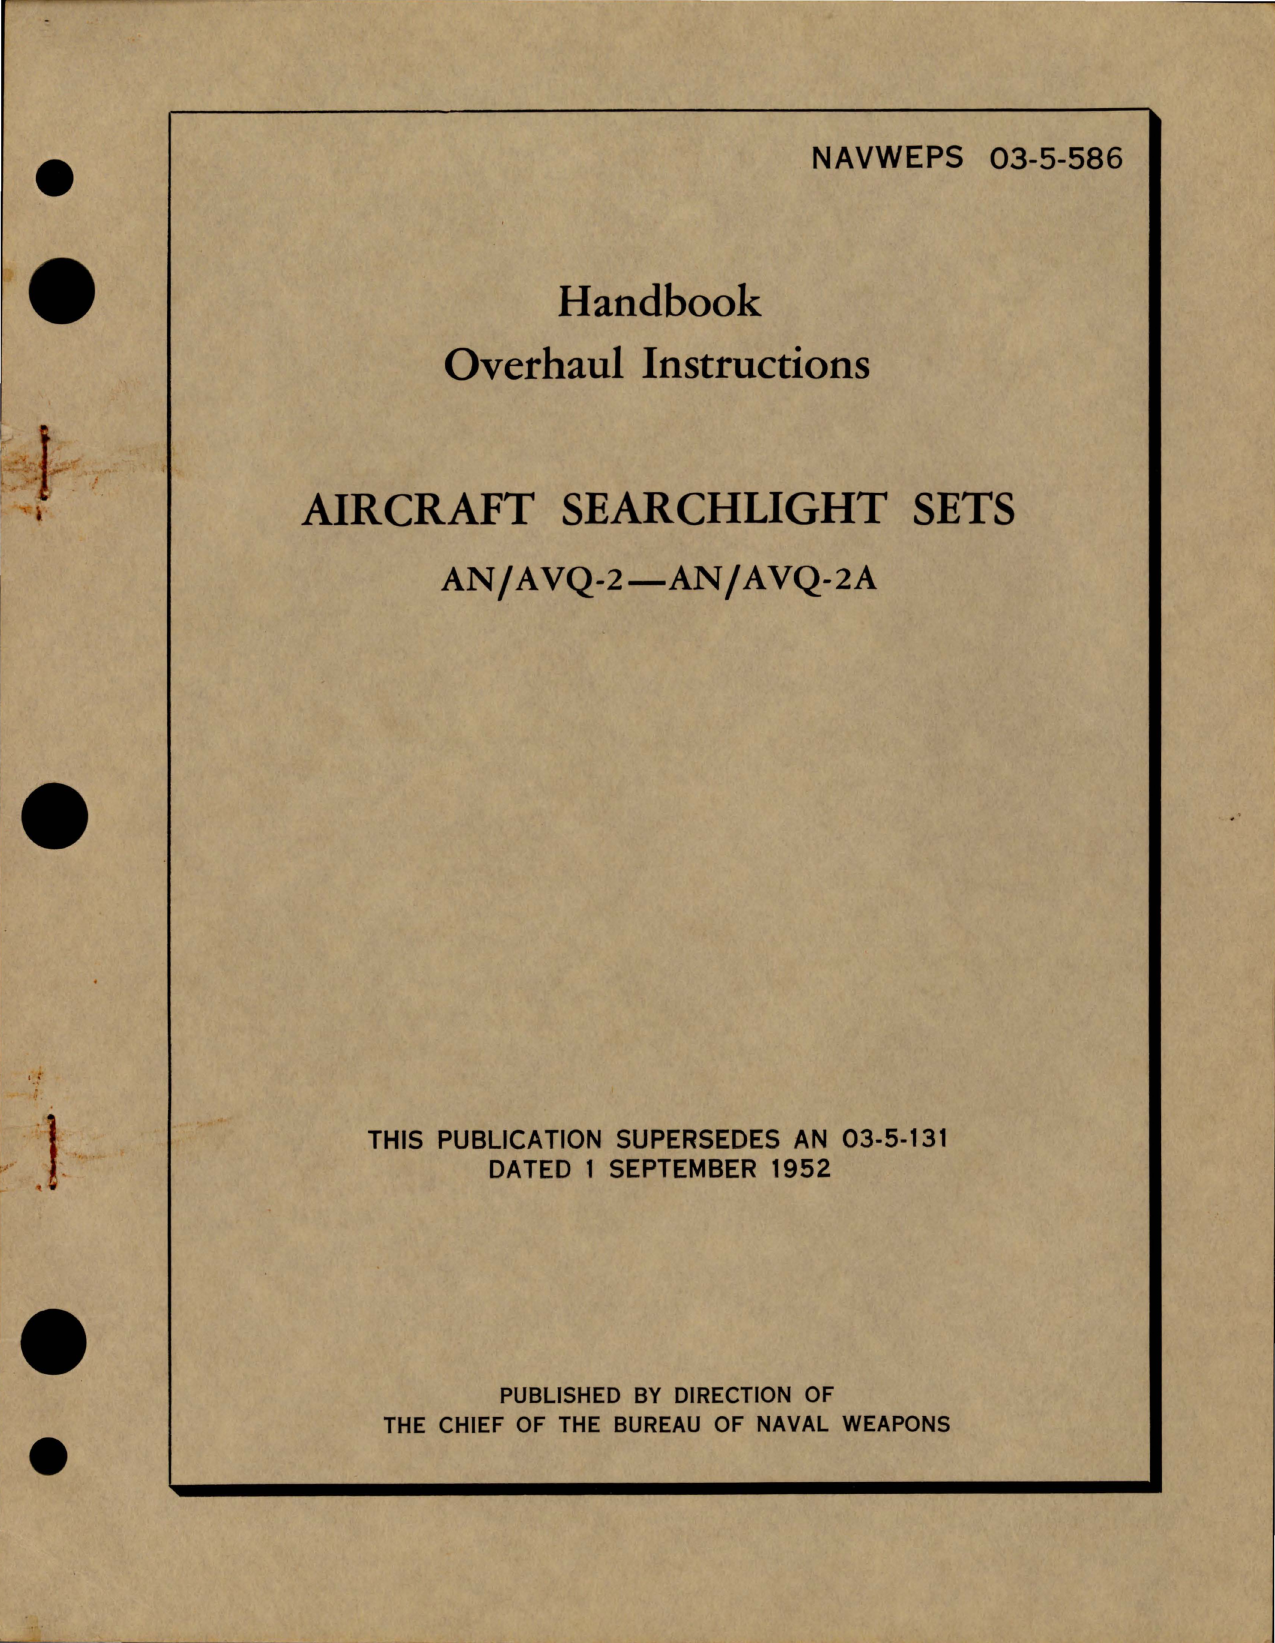 Sample page 1 from AirCorps Library document: Overhaul Instructions for Aircraft Searchlight Sets - AN-AVQ-2 and AN-AVQ-2A